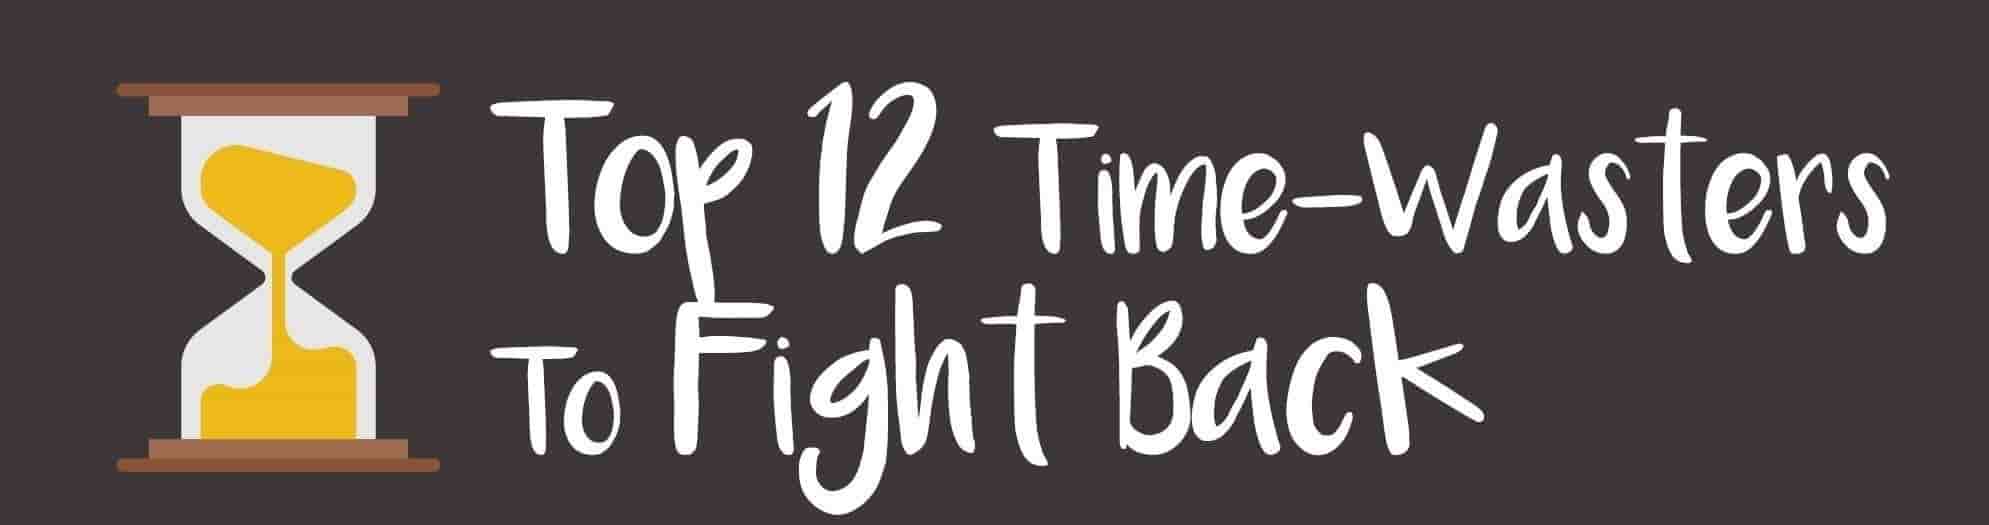 Top 12 Time-Wasters to Fight Back